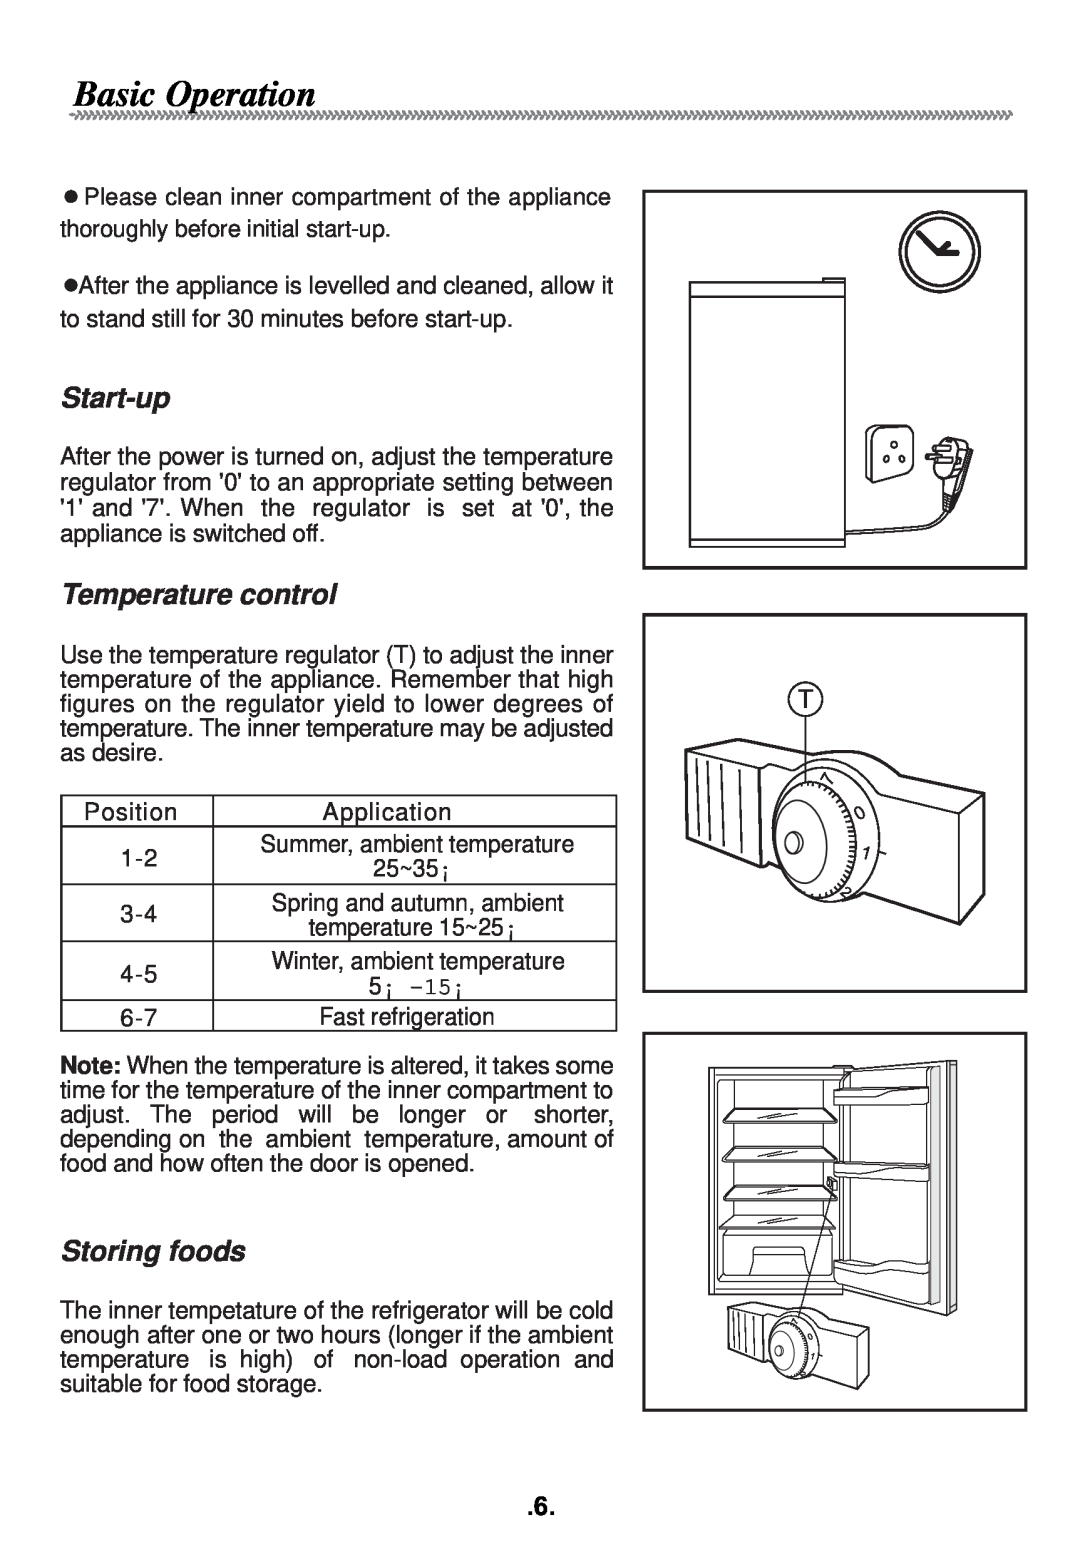 Haier AL92 manual Basic Operation, Start-up, Temperature control, Storing foods 